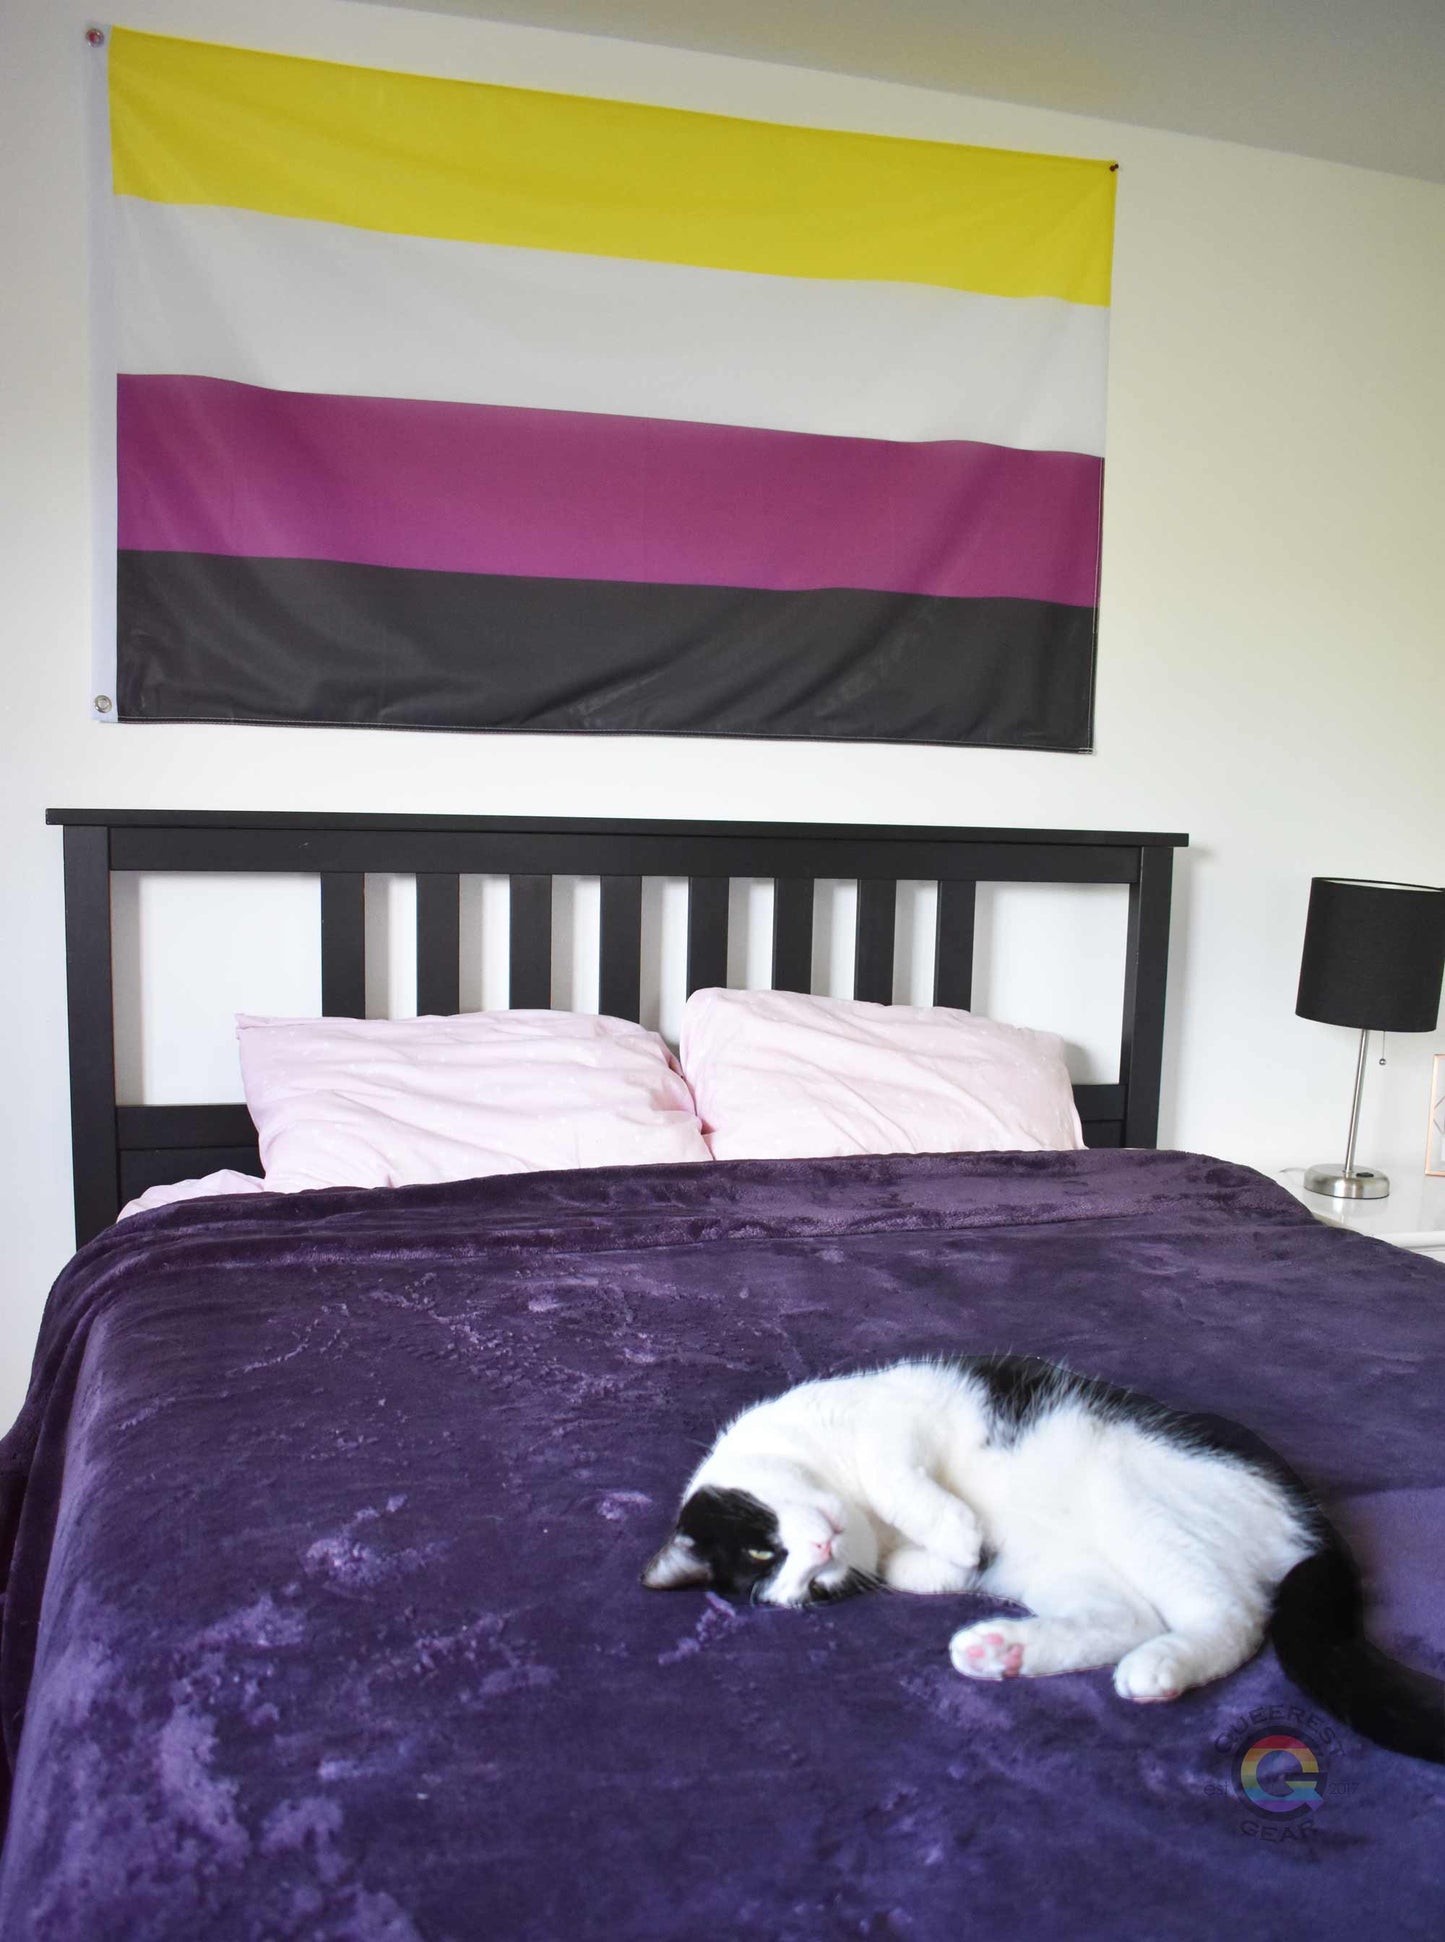 3’x5’ nonbinary pride flag hanging horizontally on the wall of a bedroom centered above a bed with a purple blanket. there's a black and white cat laying on the bed